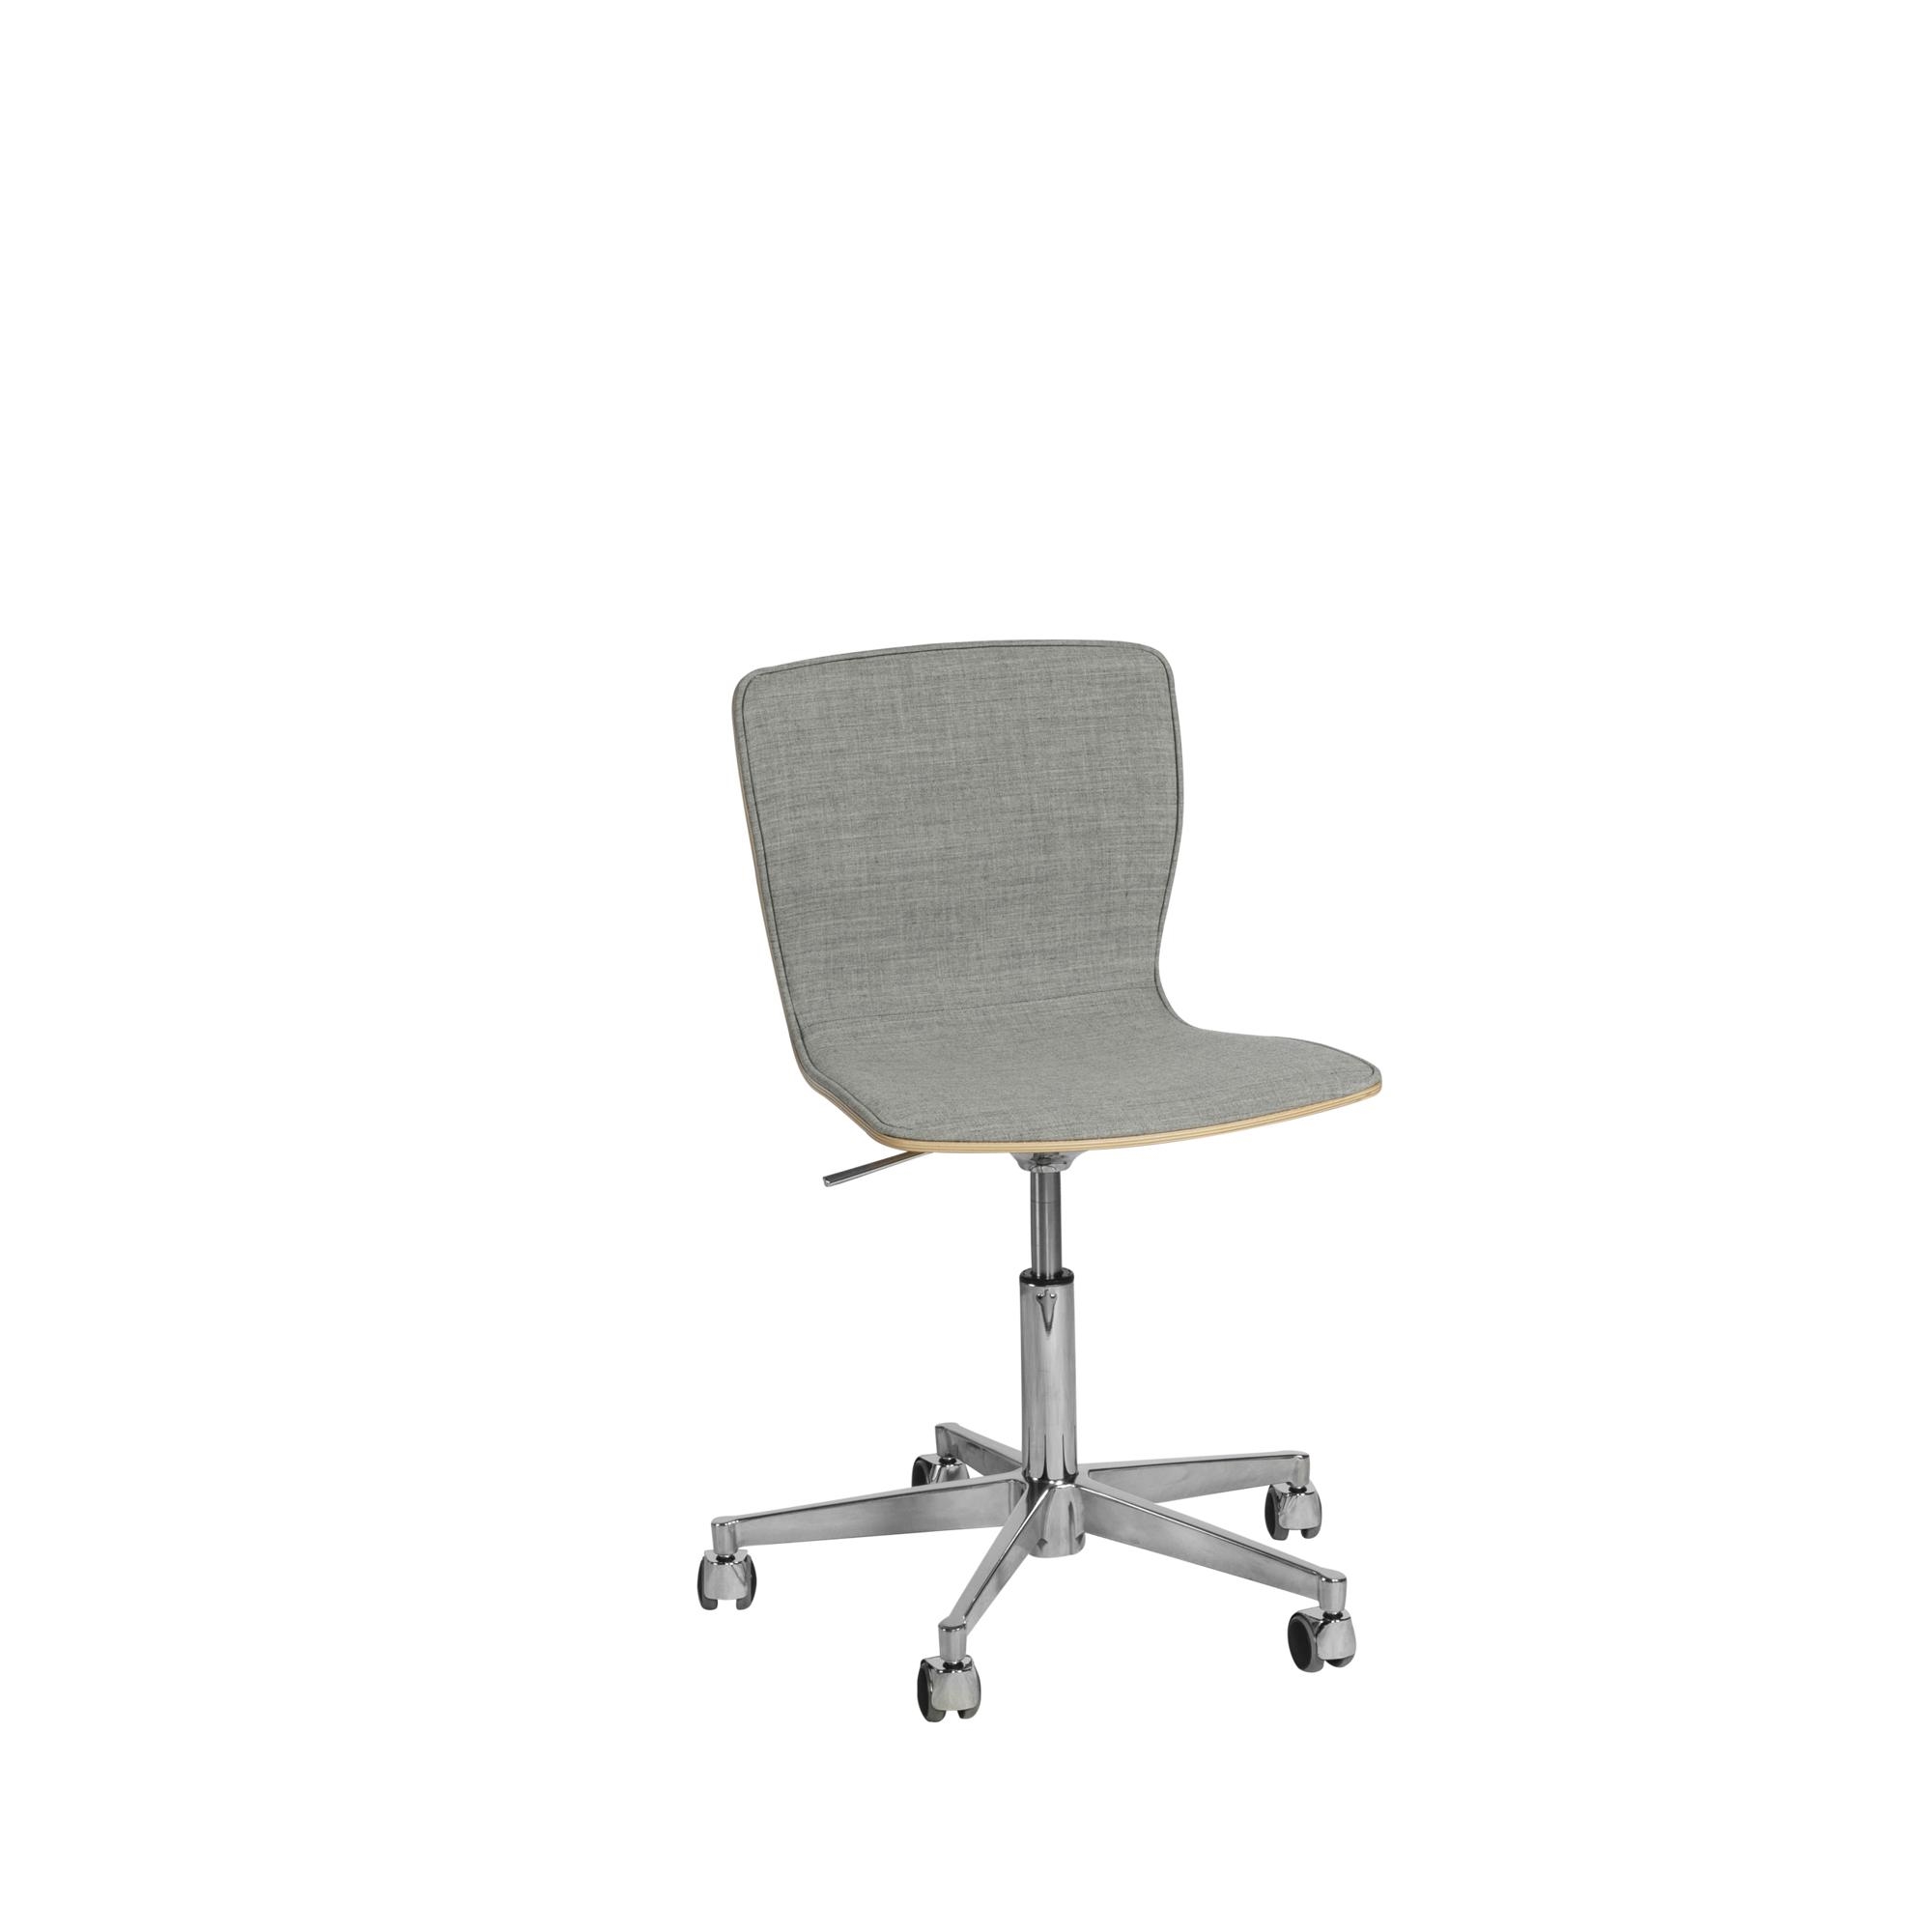 Magnus Olesen Butterfly Swivel Slim Edition Polished Aluminum/ Remix/Seat and Back in Oak